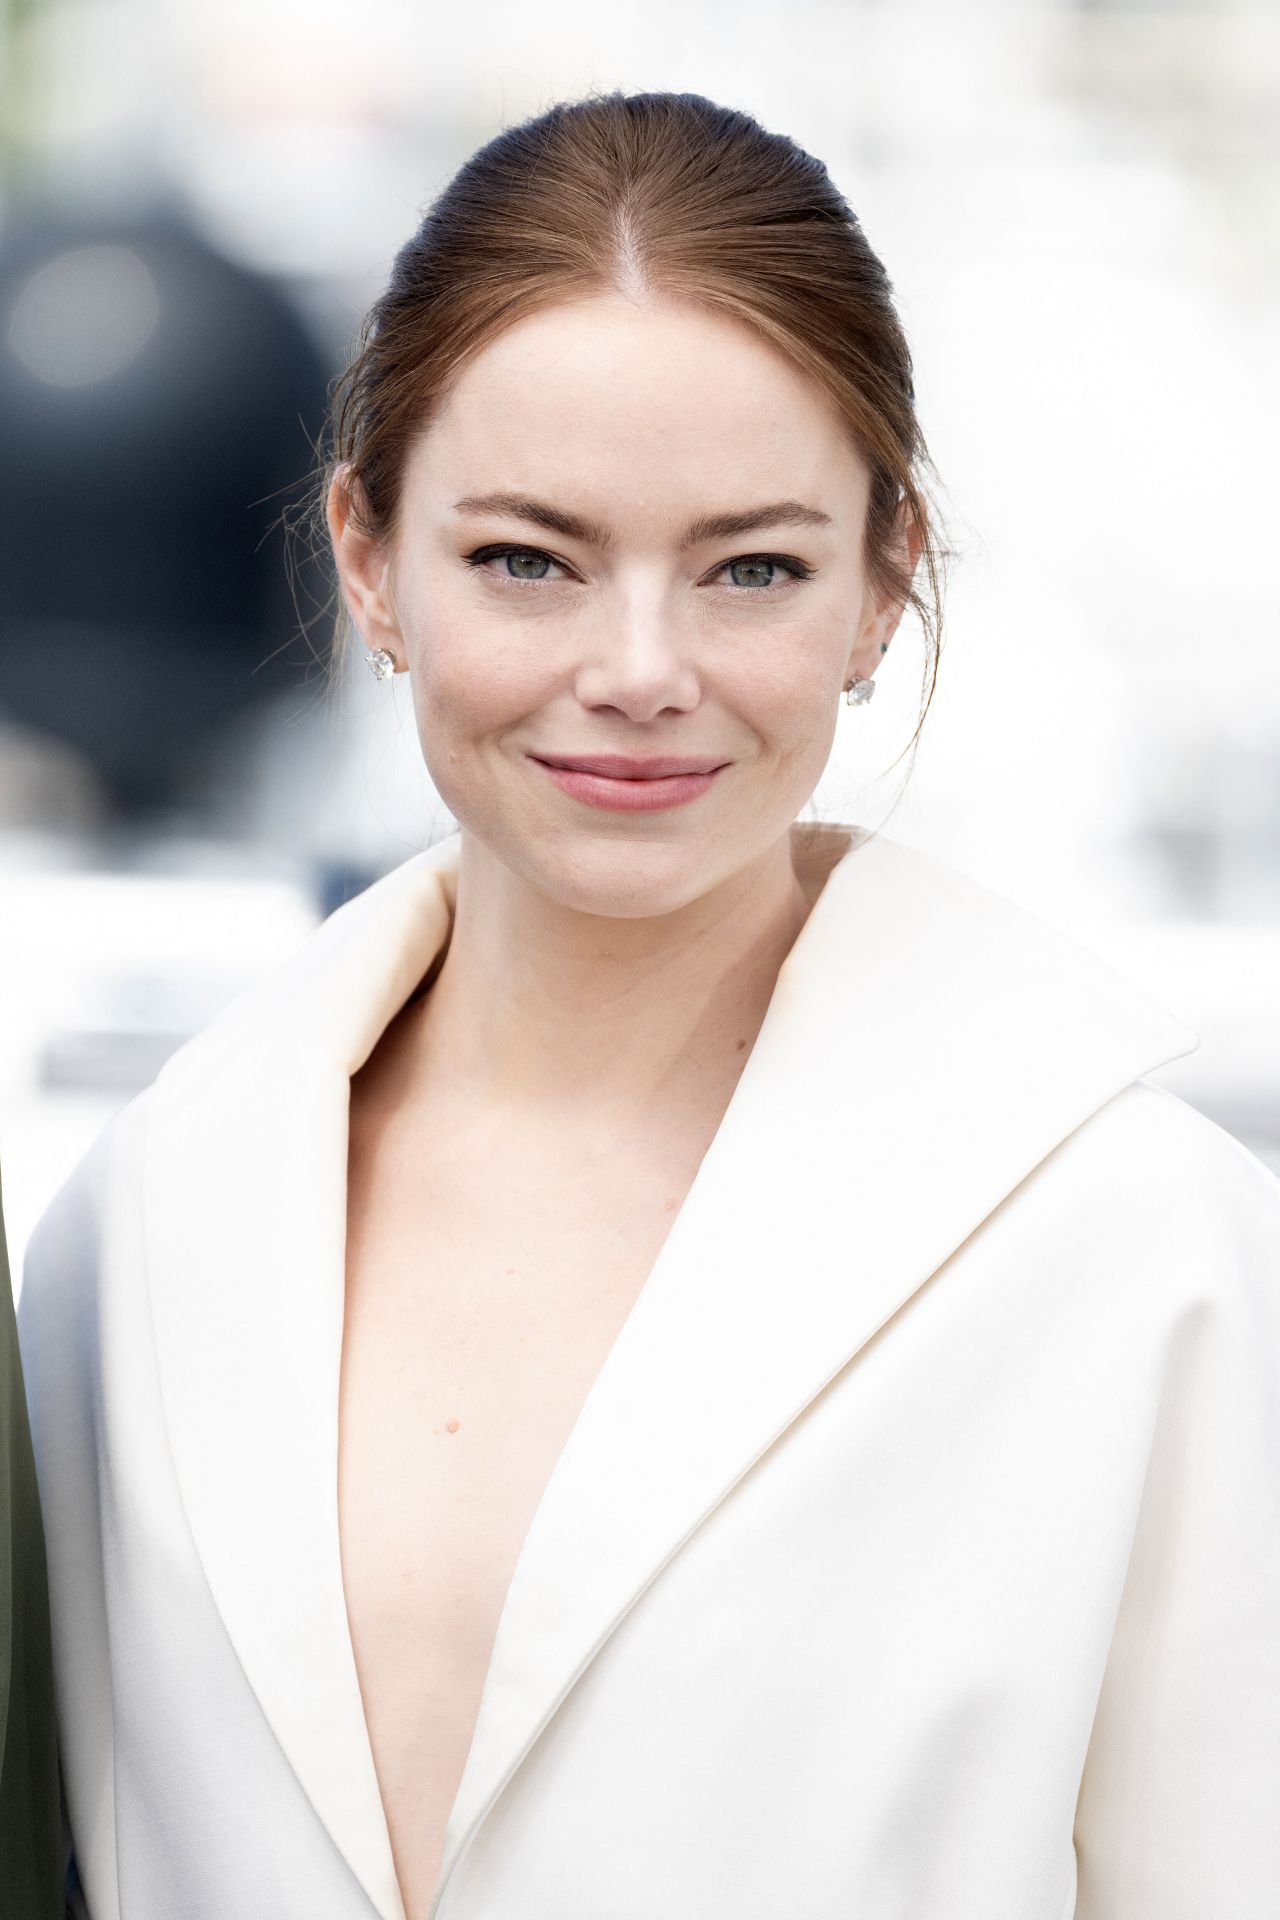 EMMA STONE AT KINDS OF KINDNESS PHOTOCALL IN CANNES FILM FESTIVAL11